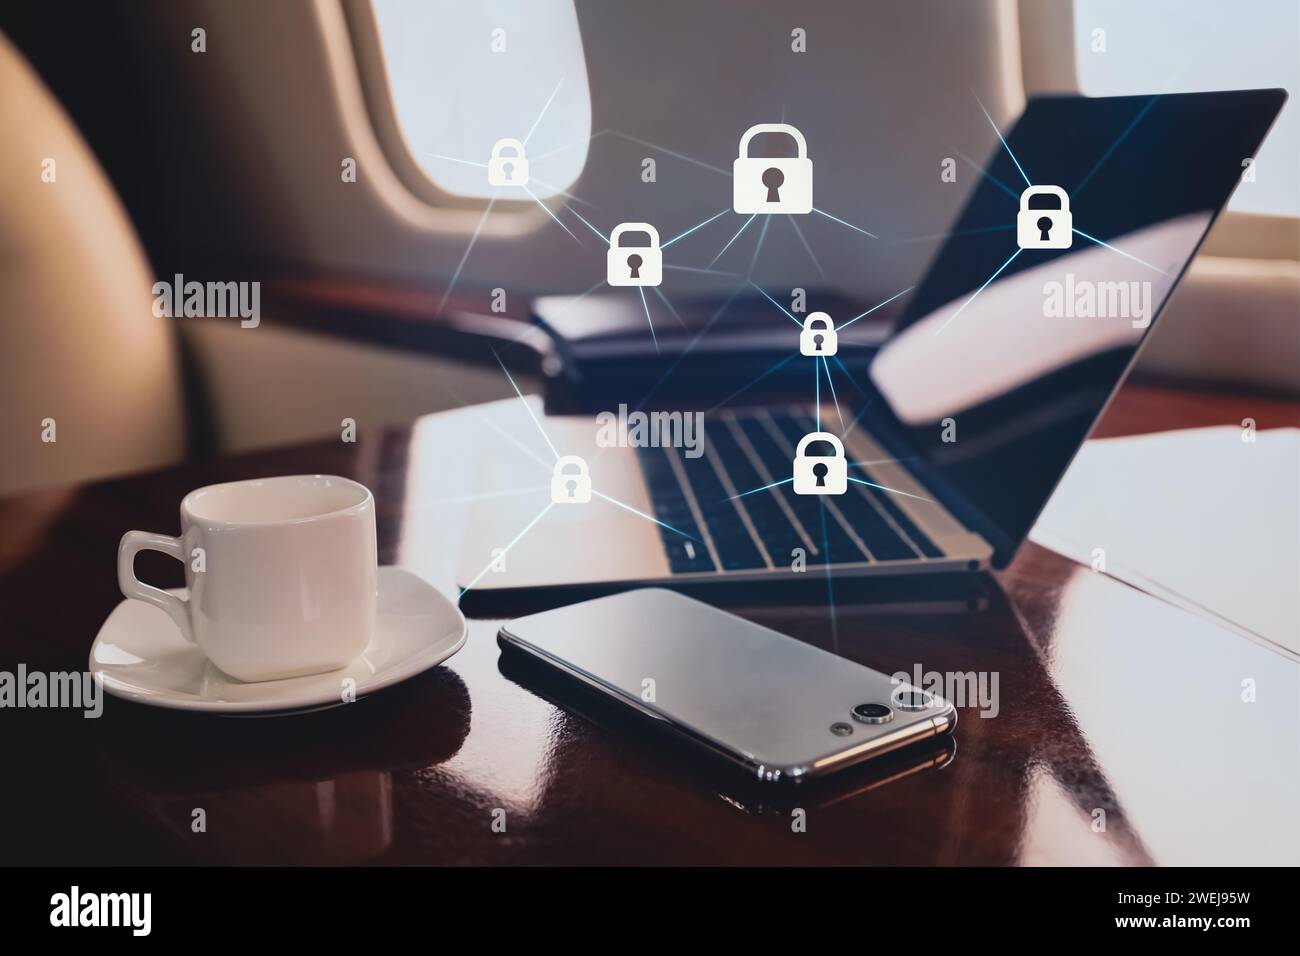 Privacy protection. Digital scheme with padlocks over laptop, smartphone and coffee in airplane Stock Photo